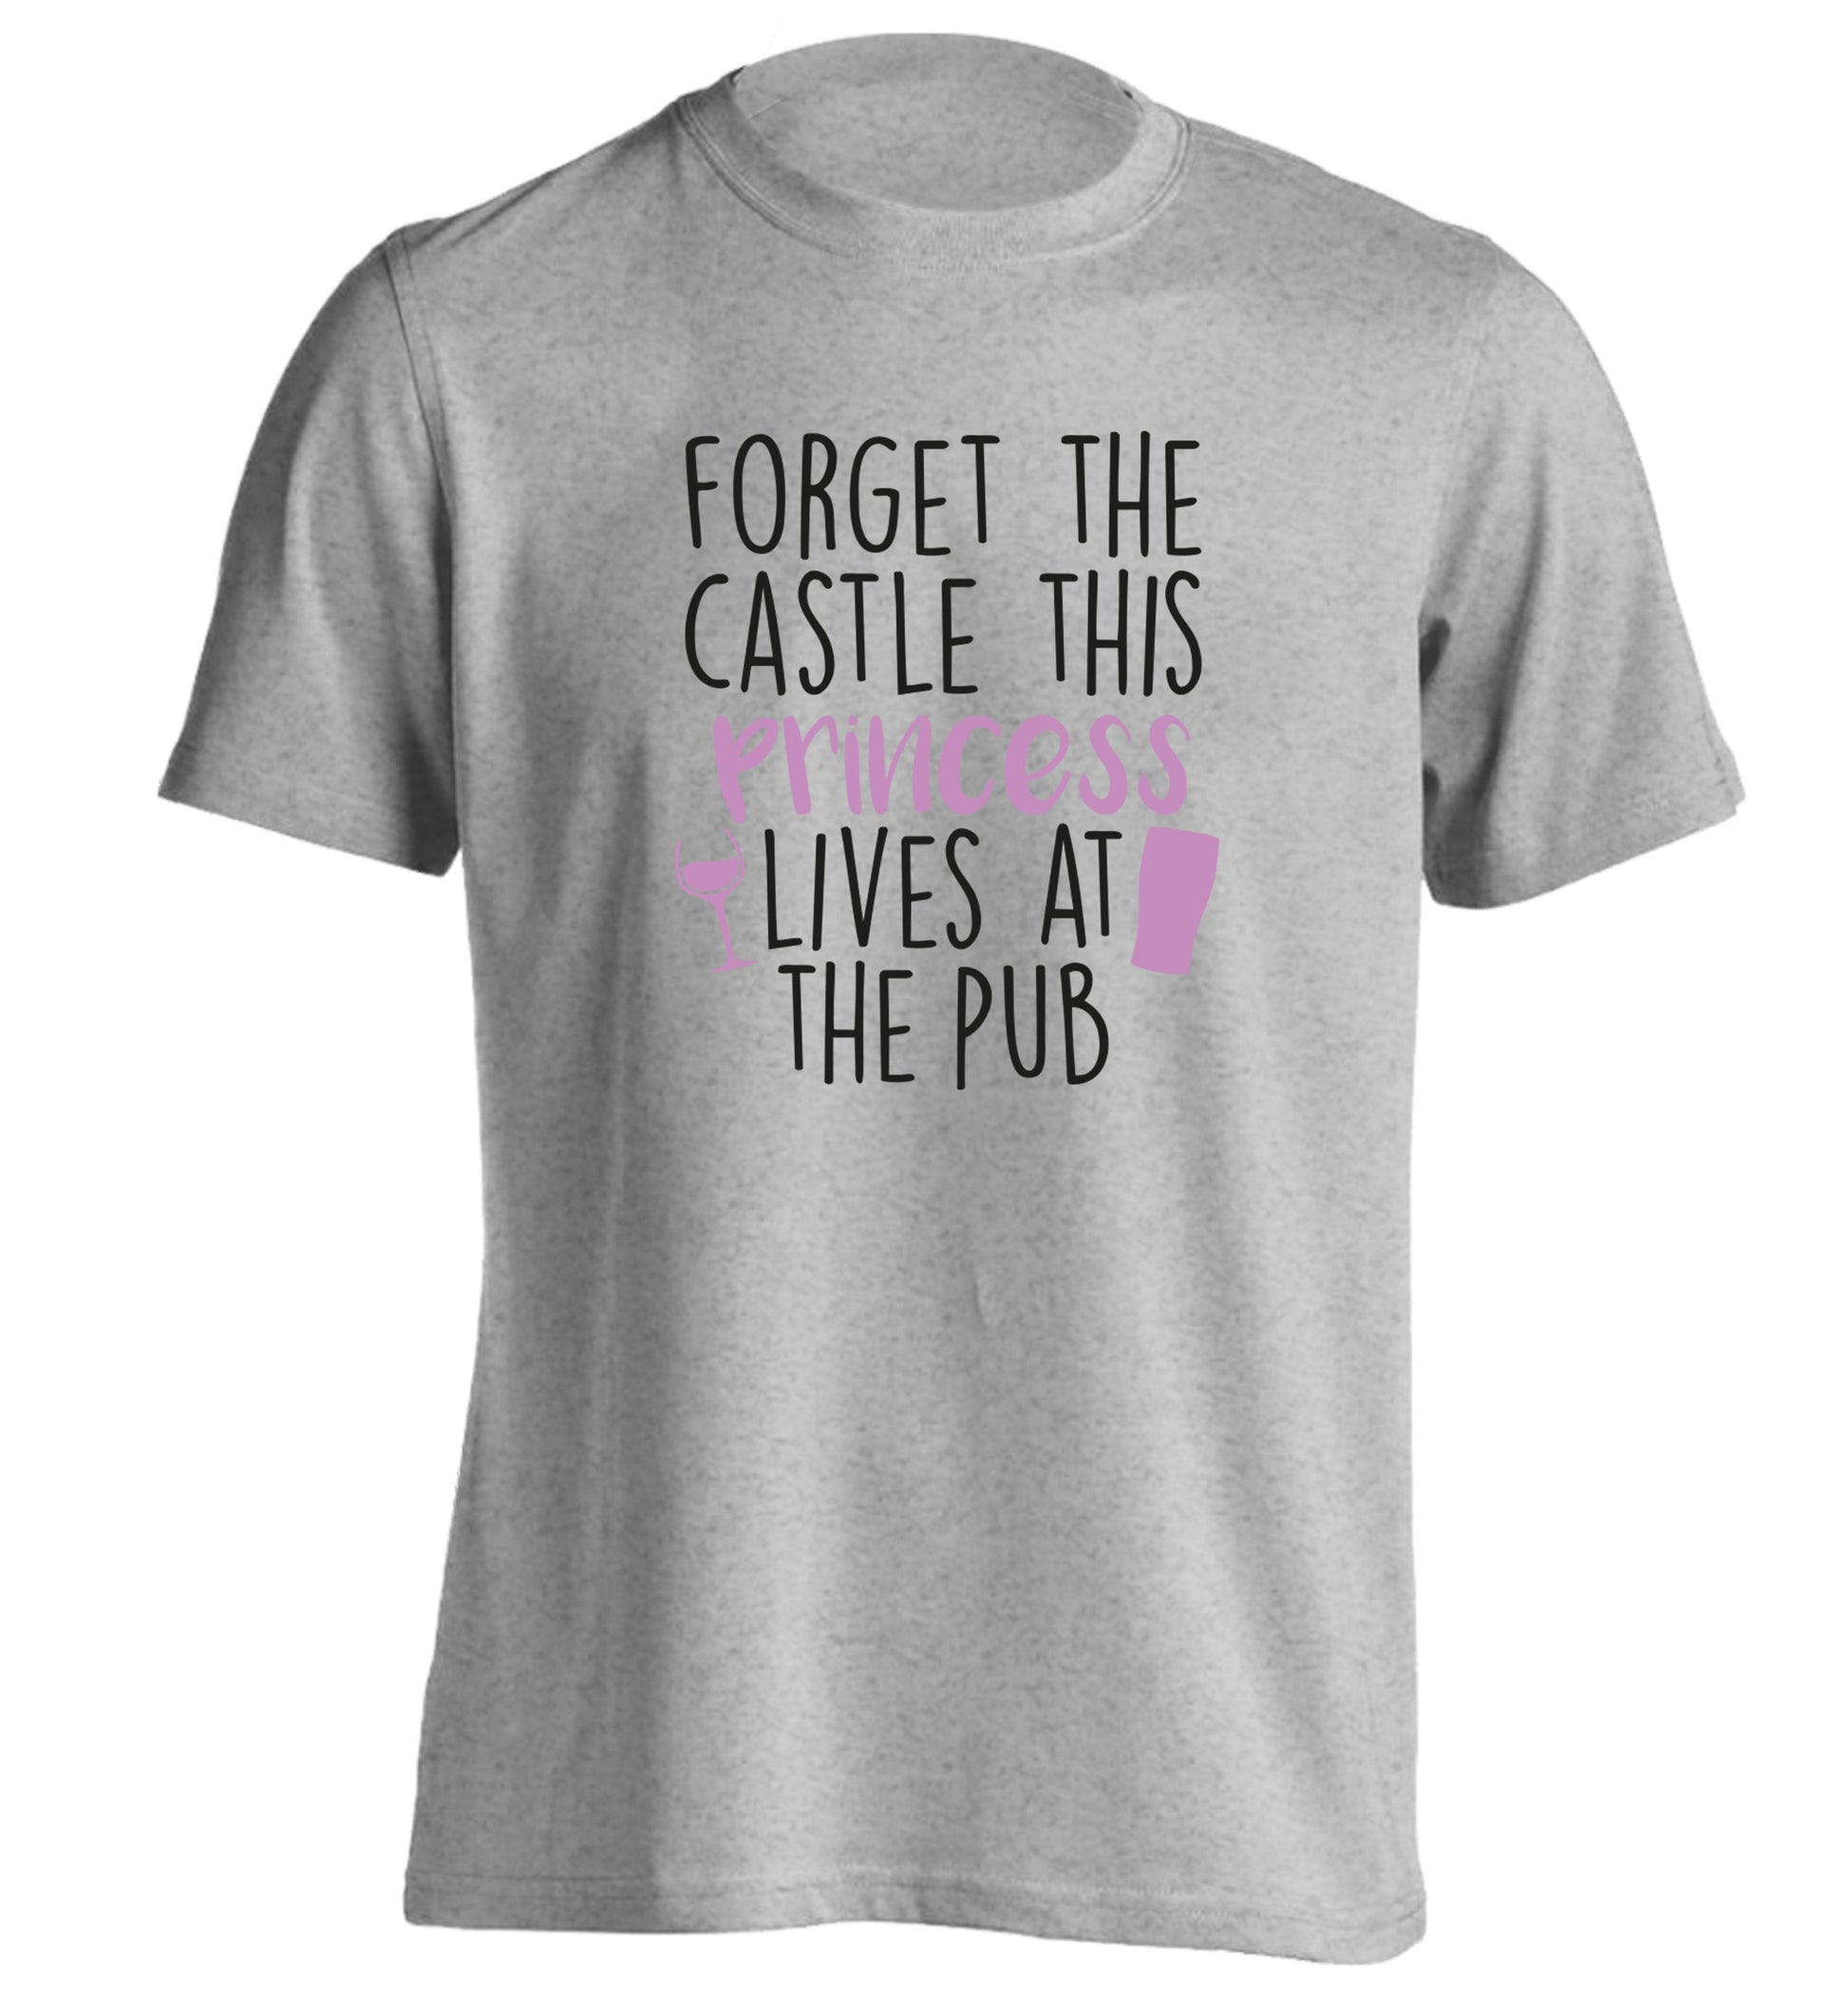 Forget the castle this princess lives at the pub adults unisex grey Tshirt 2XL